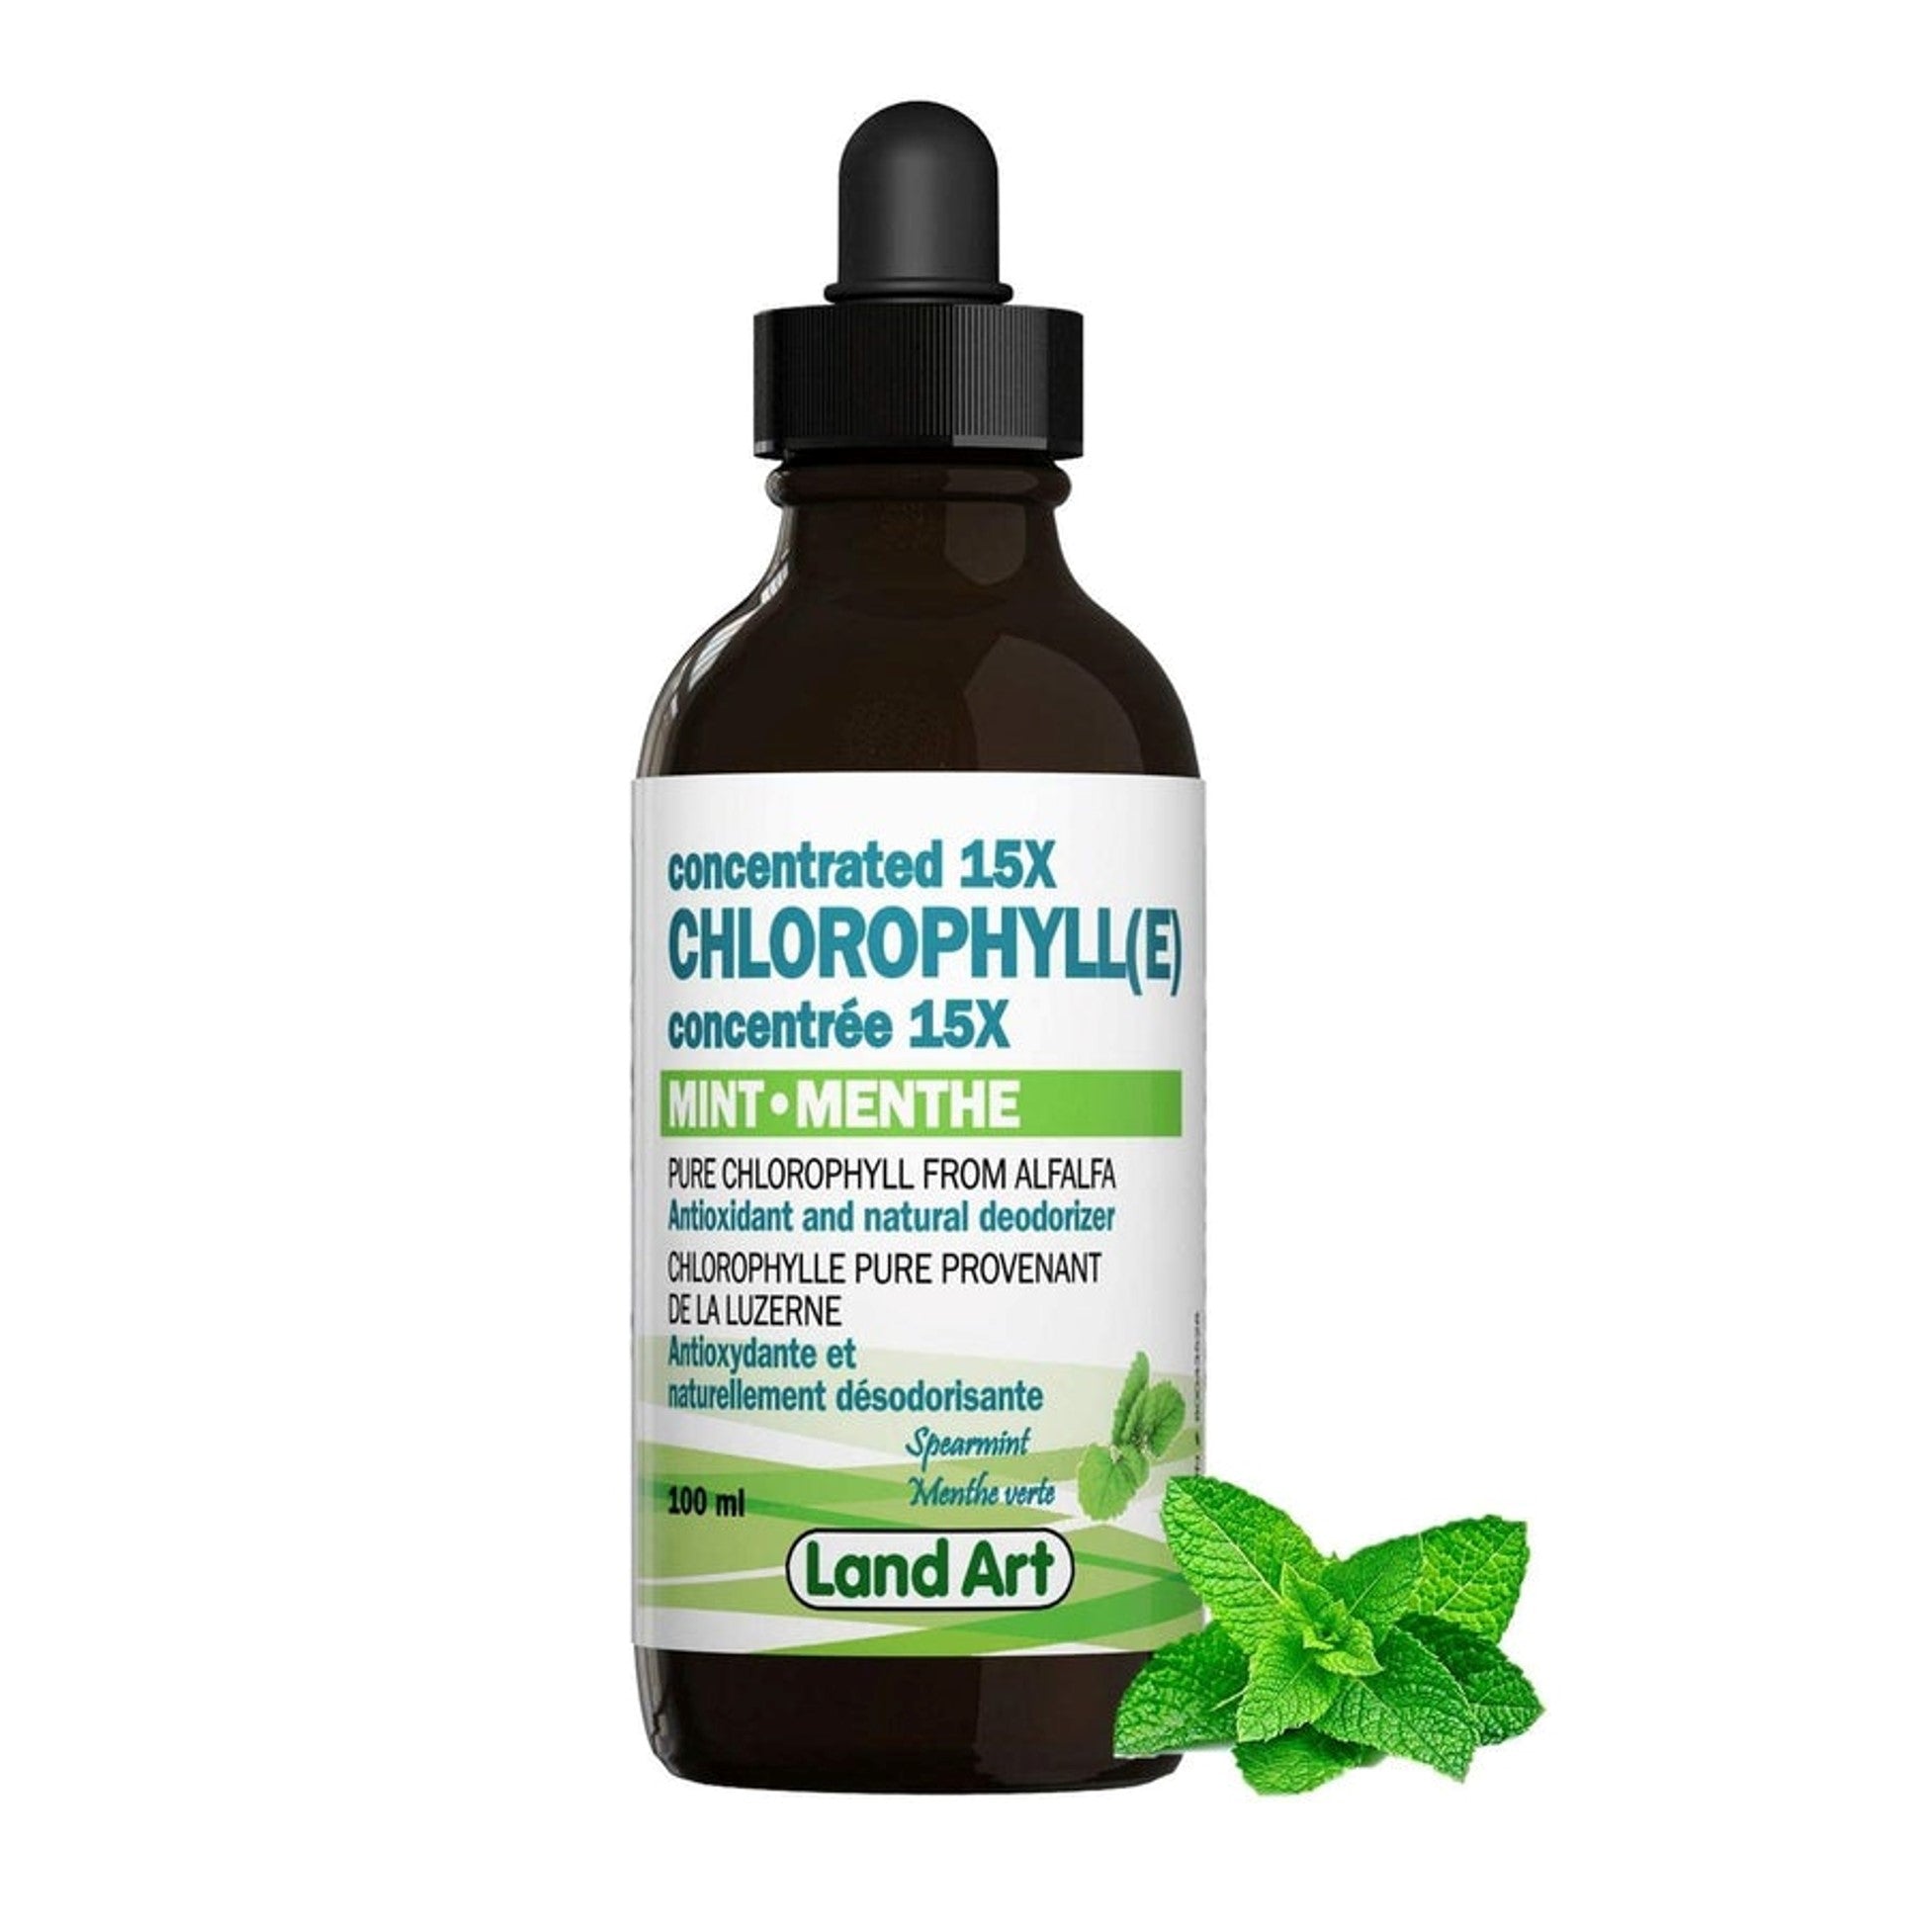 Land Art Chlorophyll(e)  Concentrated 15x 100ml